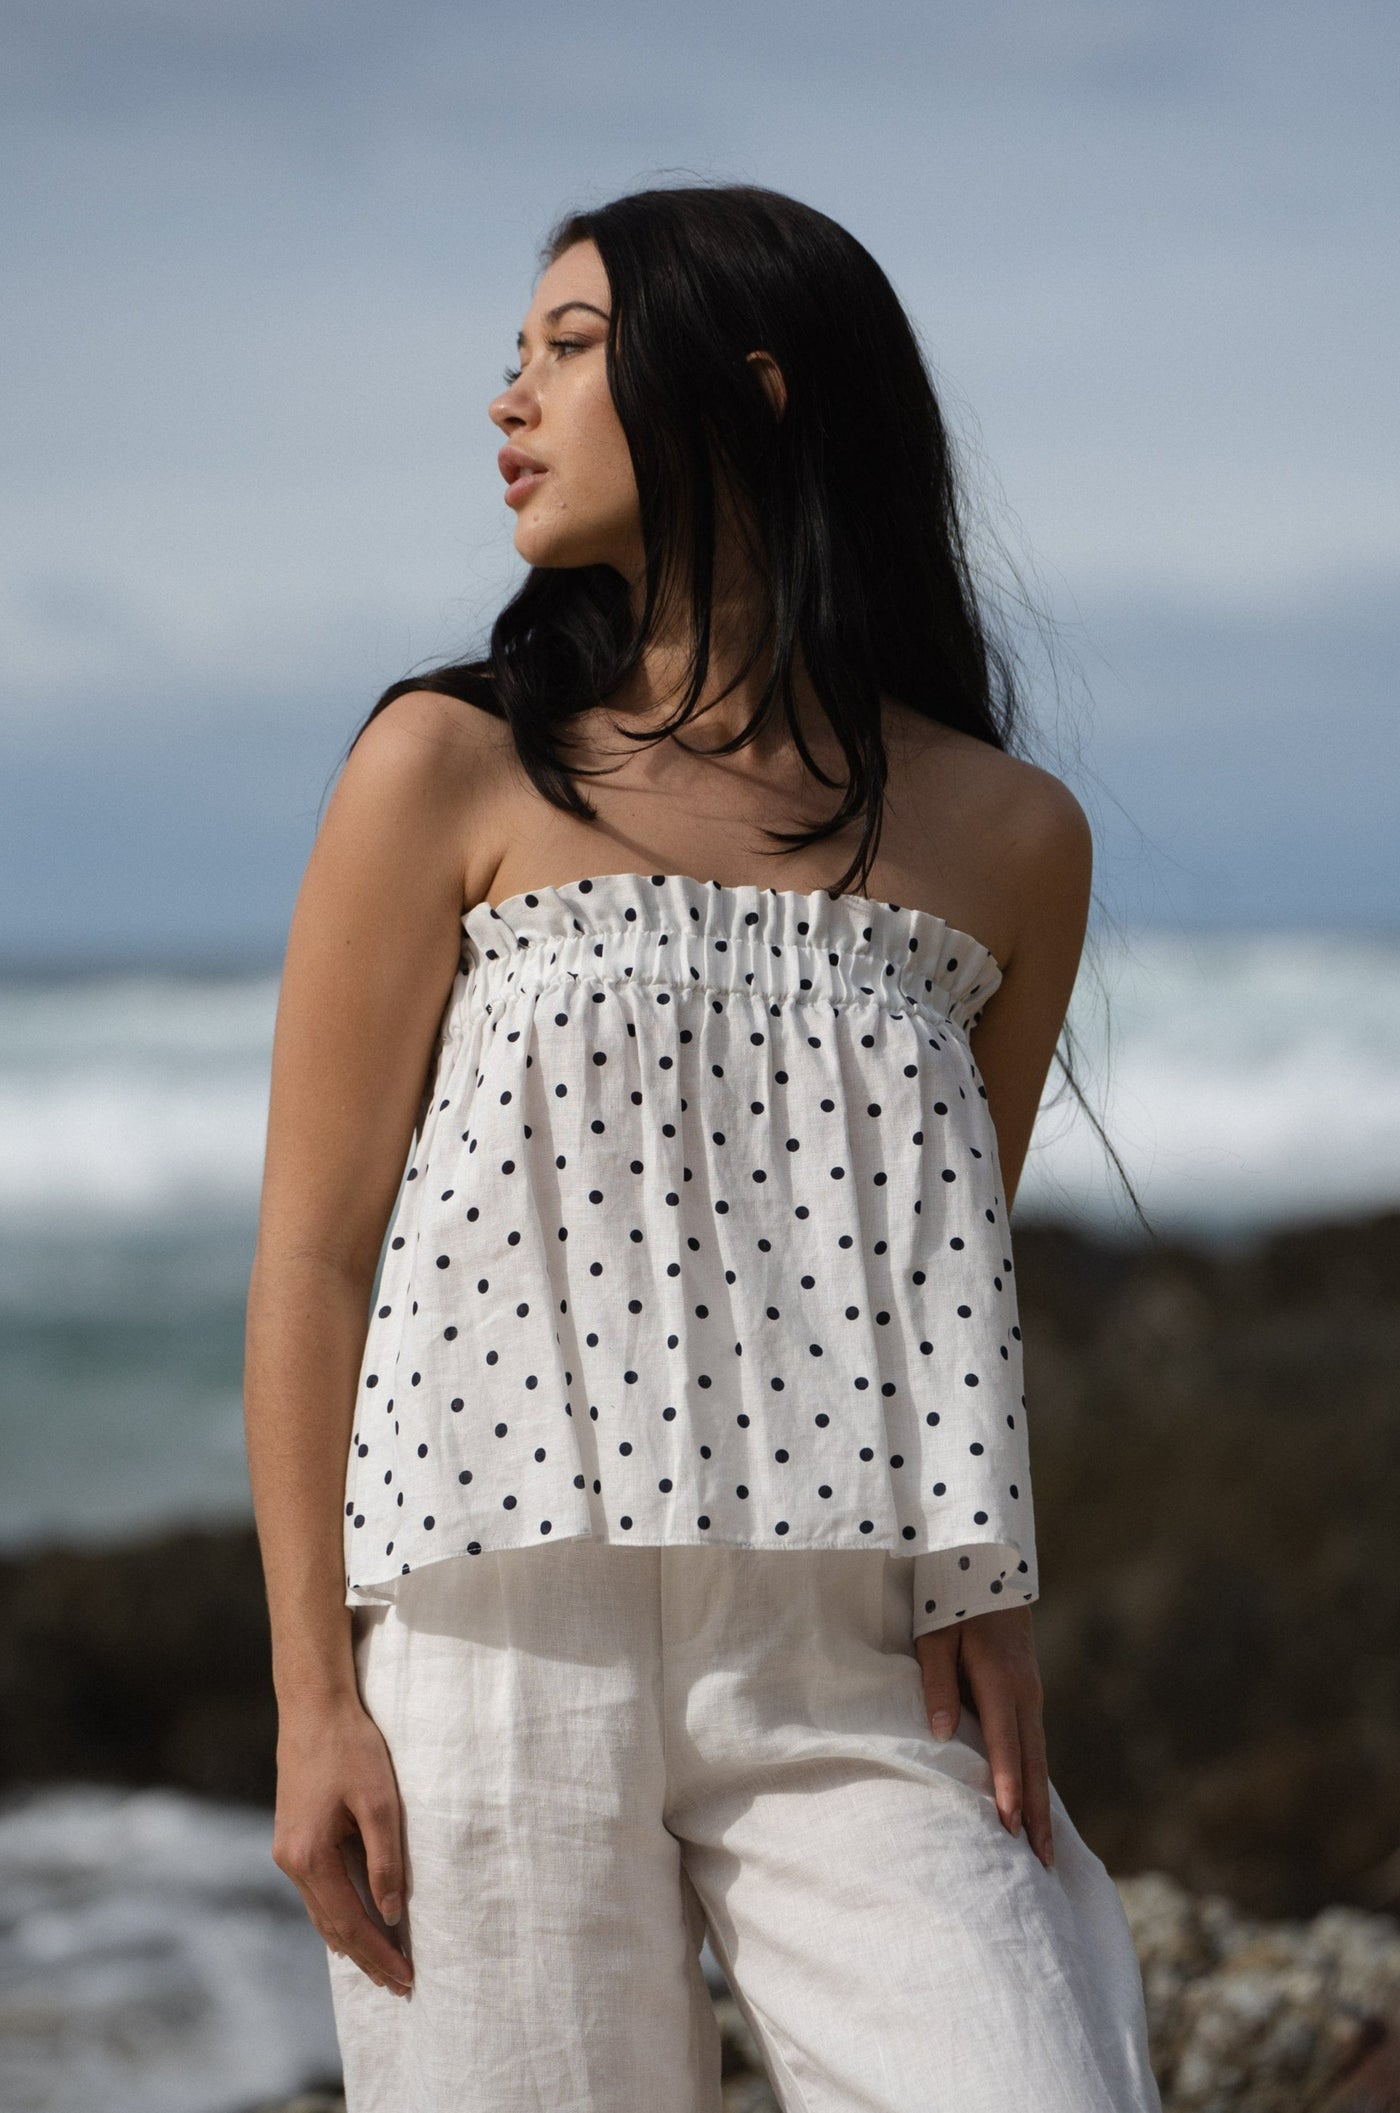 Lilly Pilly Collection 100% organic linen Pippa Top in Polka Dot